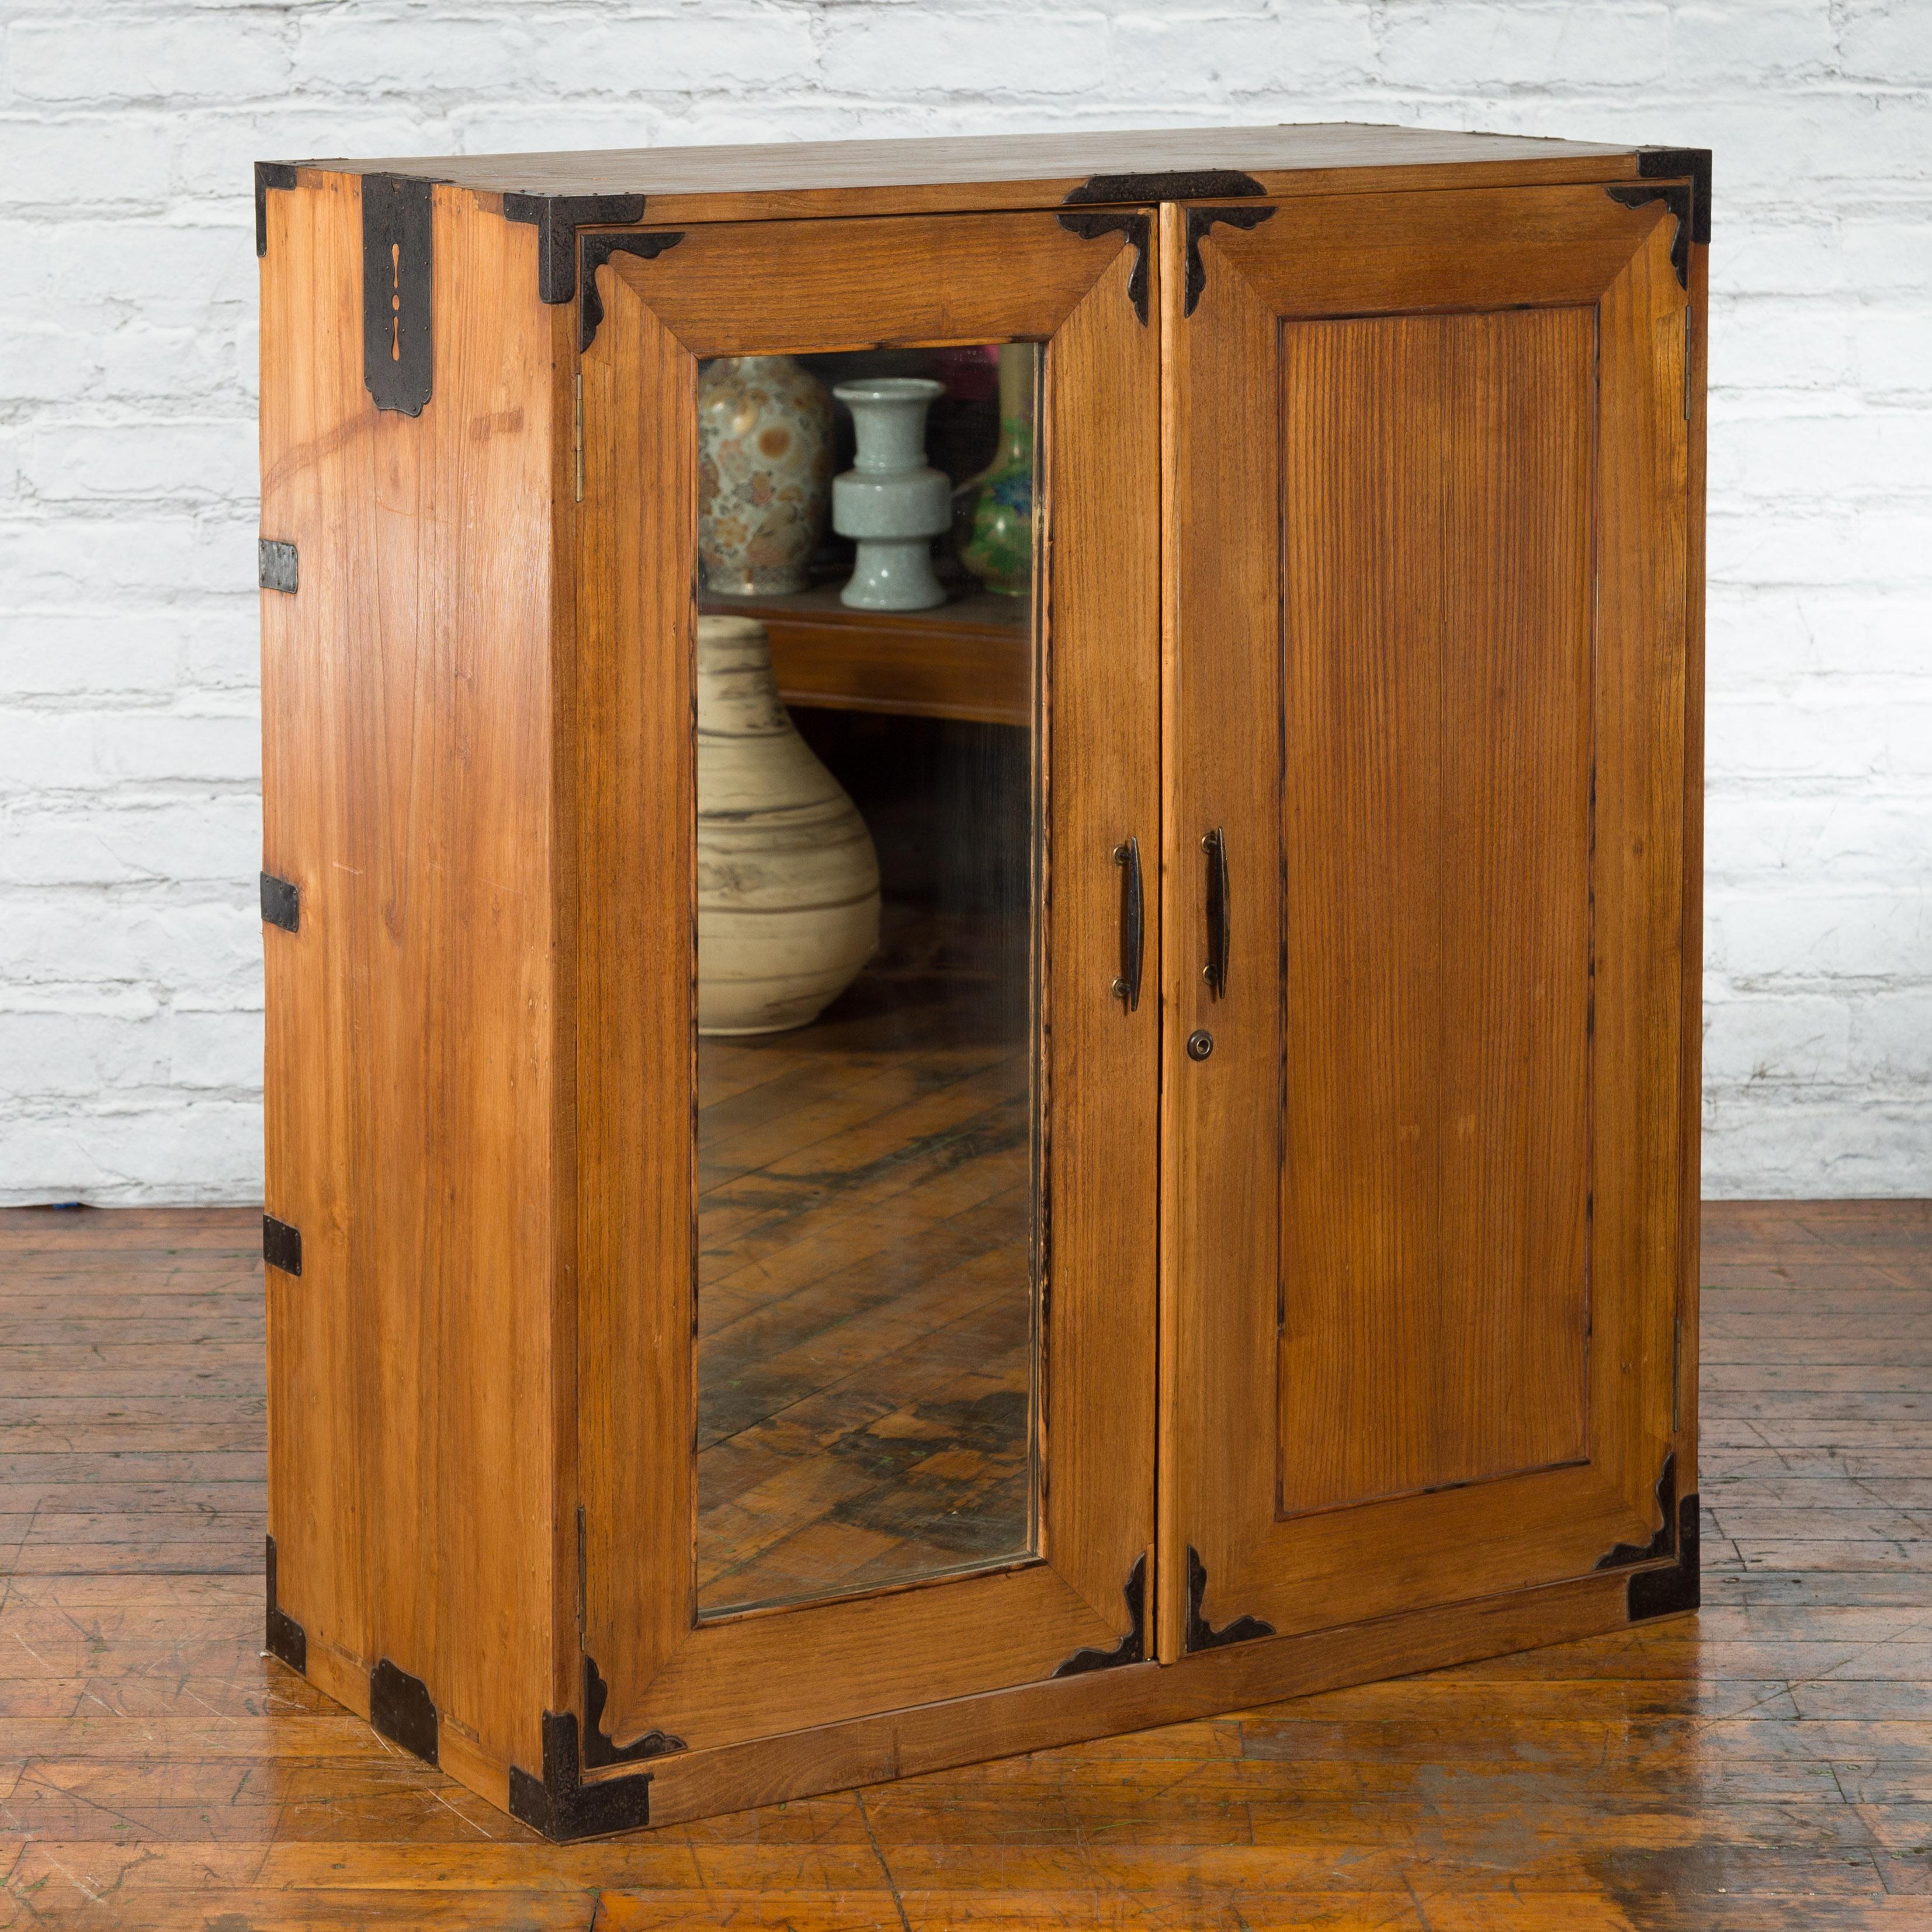 Japanese Early 20th Century Wooden Tansu Clothing Cabinet with Mirrored Door In Good Condition For Sale In Yonkers, NY